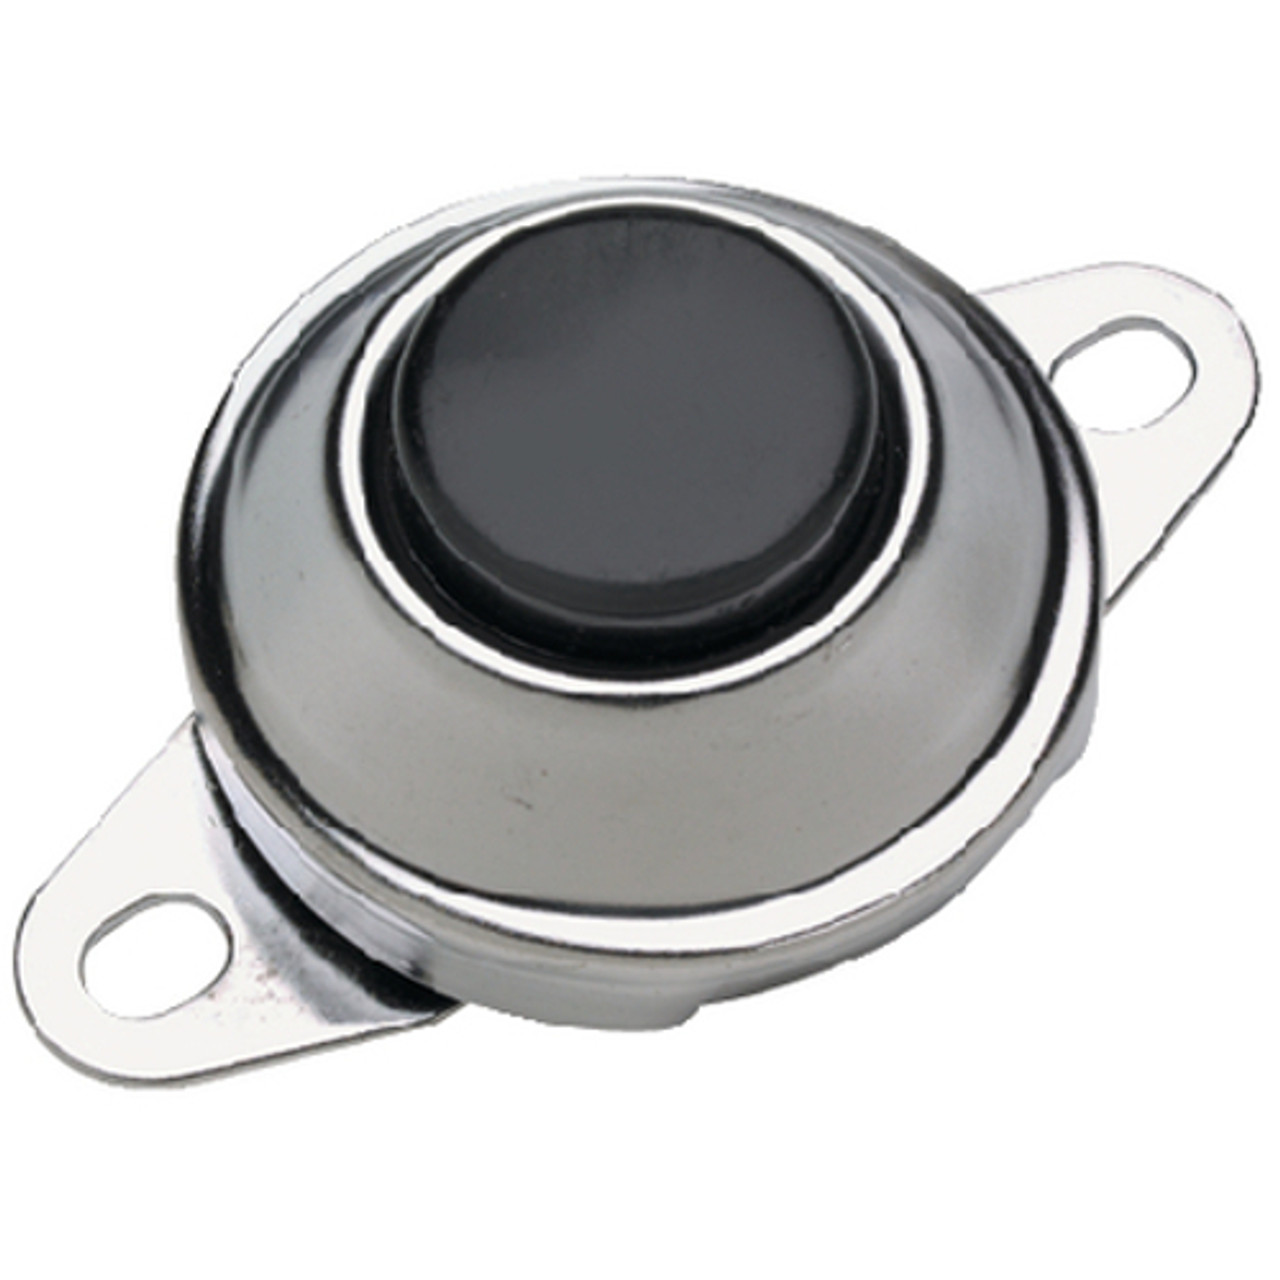 Surface Mount Momentary Push Button Horn Switch for Boats